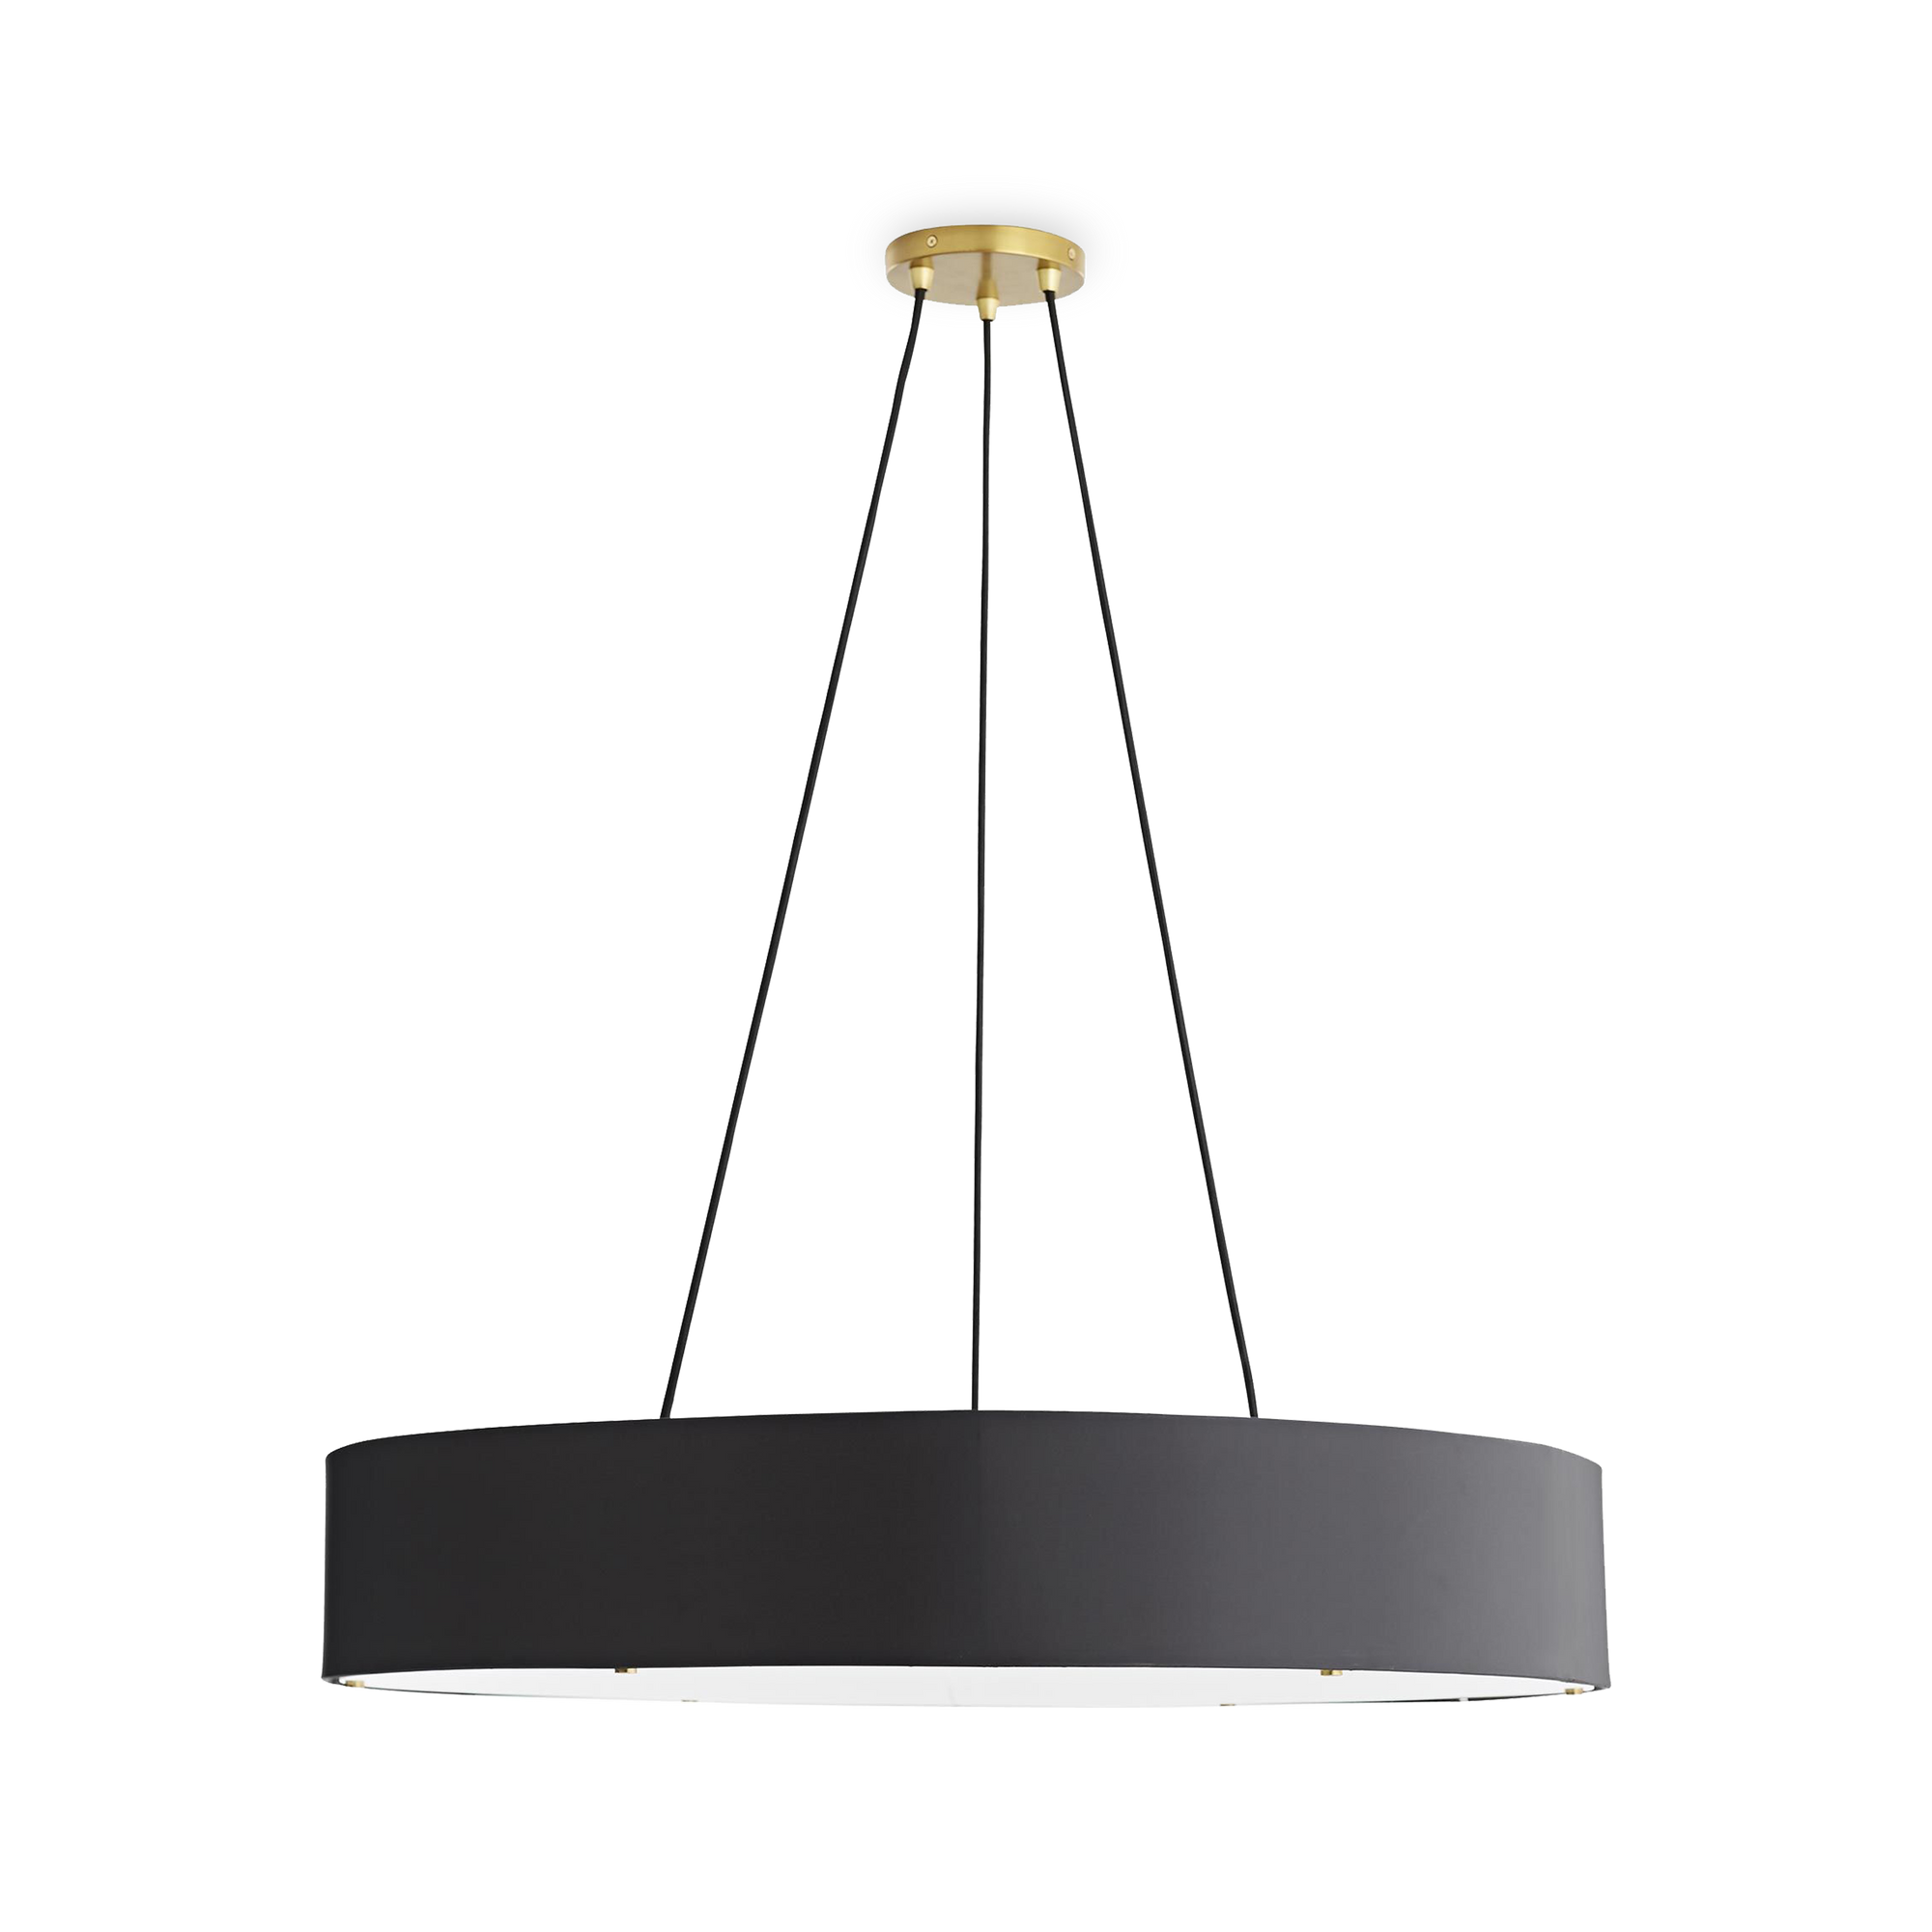 Clean, sophisticated and practical, this six-light chandelier has a sleek, narrow silhouette perfect for hanging over an island in the kitchen or over a table that wants to be the 